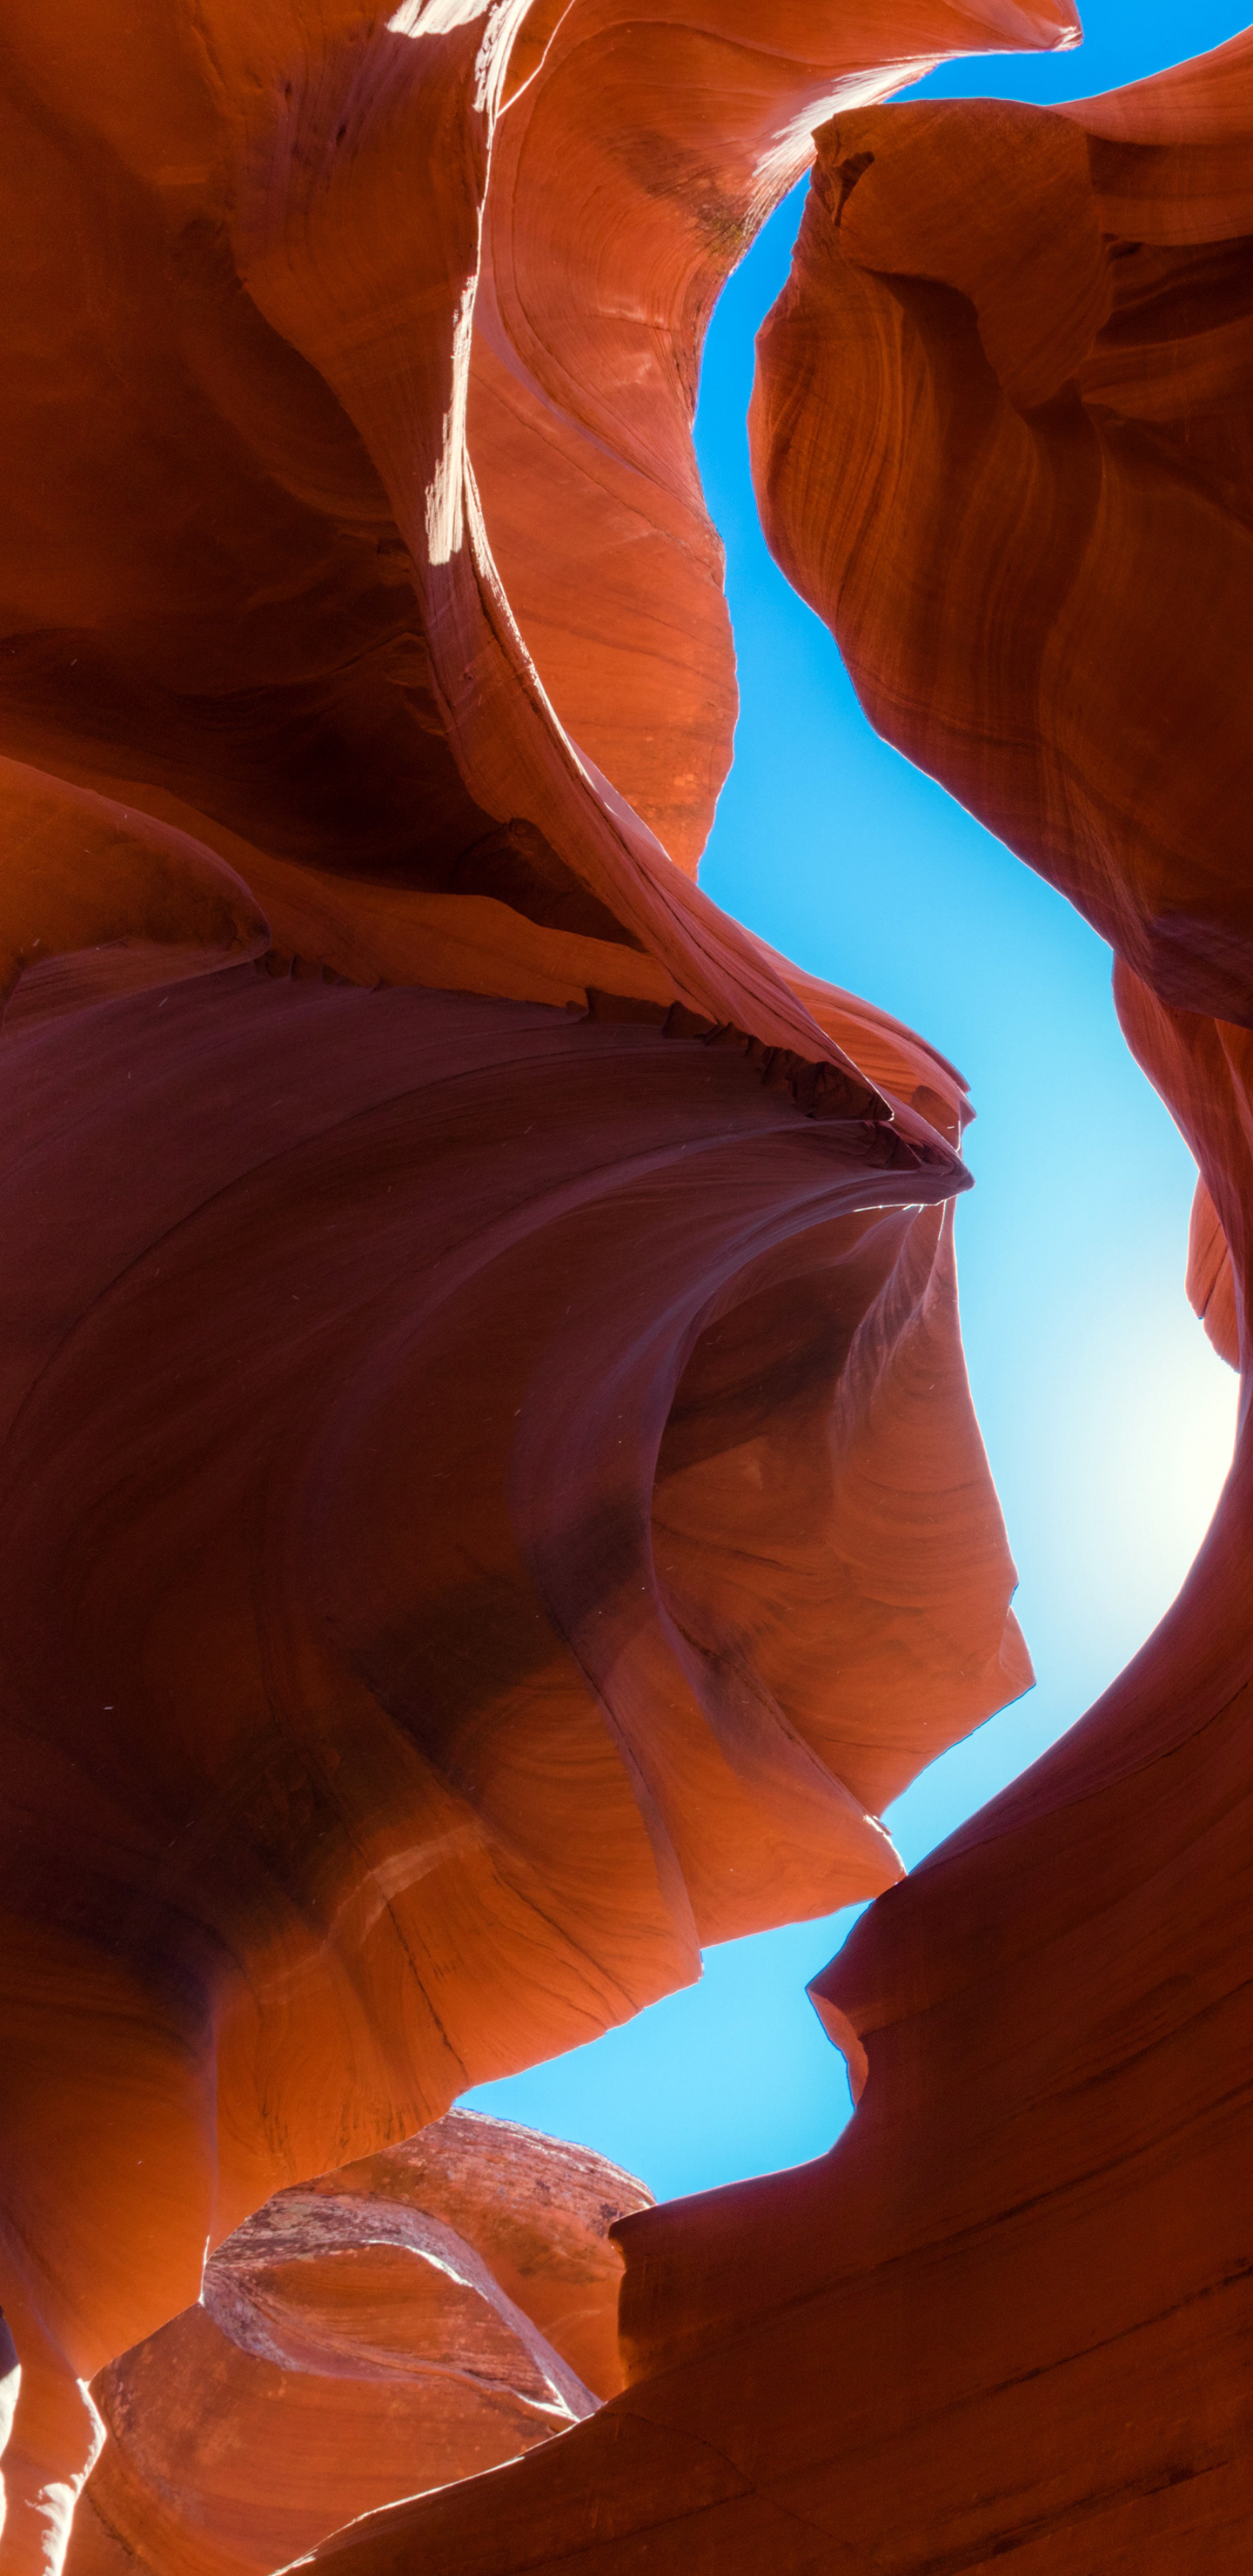 Samsung Galaxy Note 8 Wallpaper with Antelope Canyon in ...